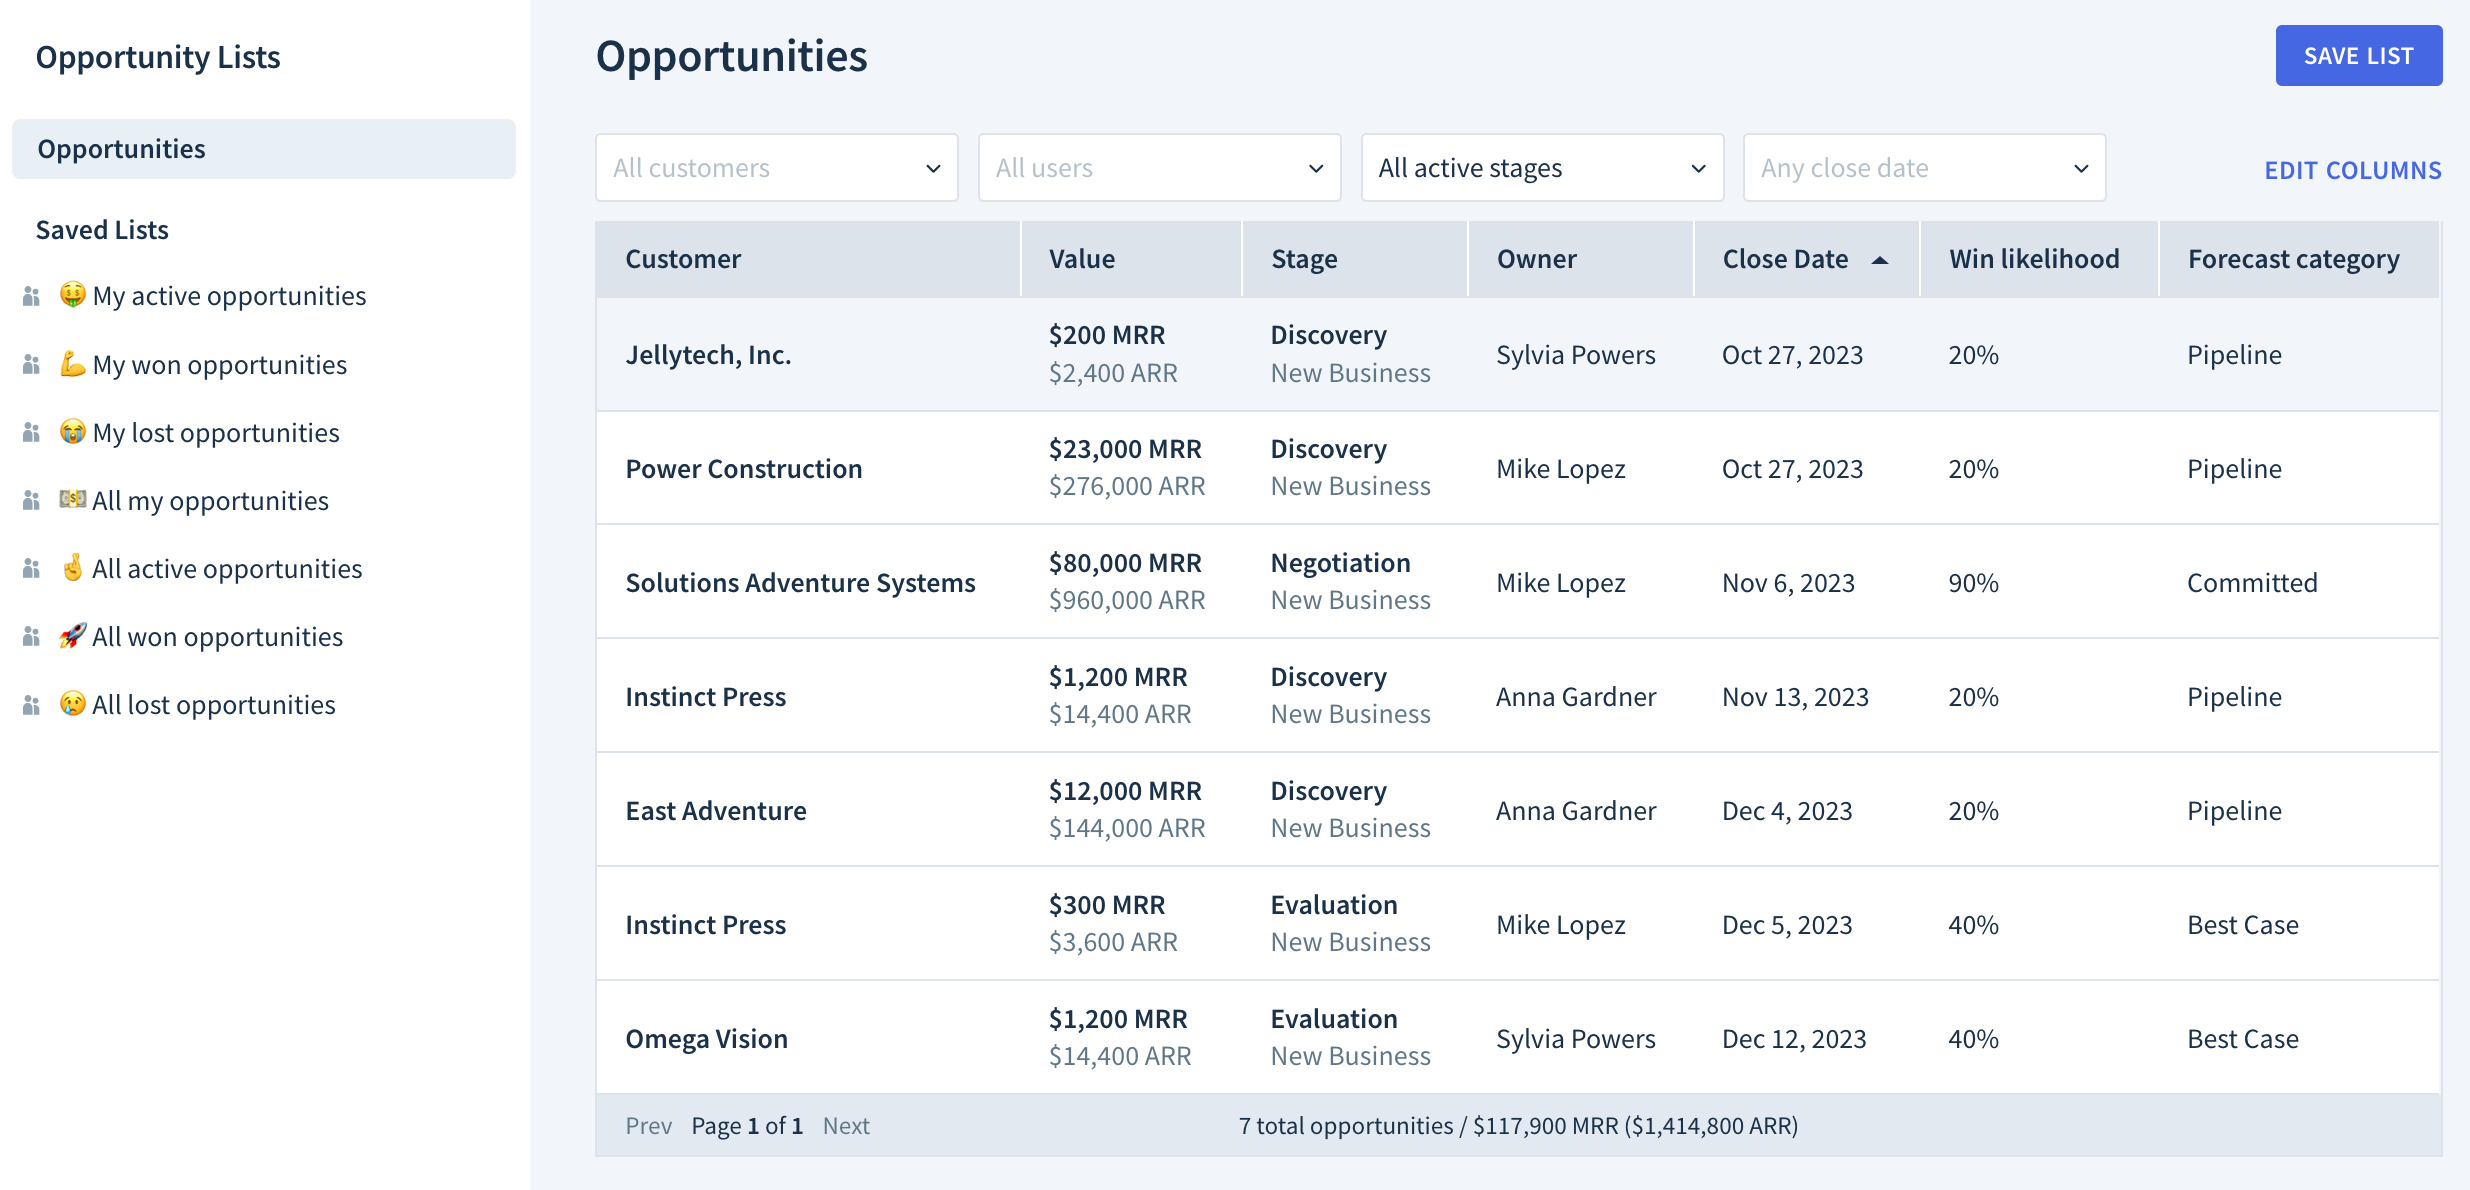 Screenshot of the Opportunities table with a list of saved opportunity lists to the left.